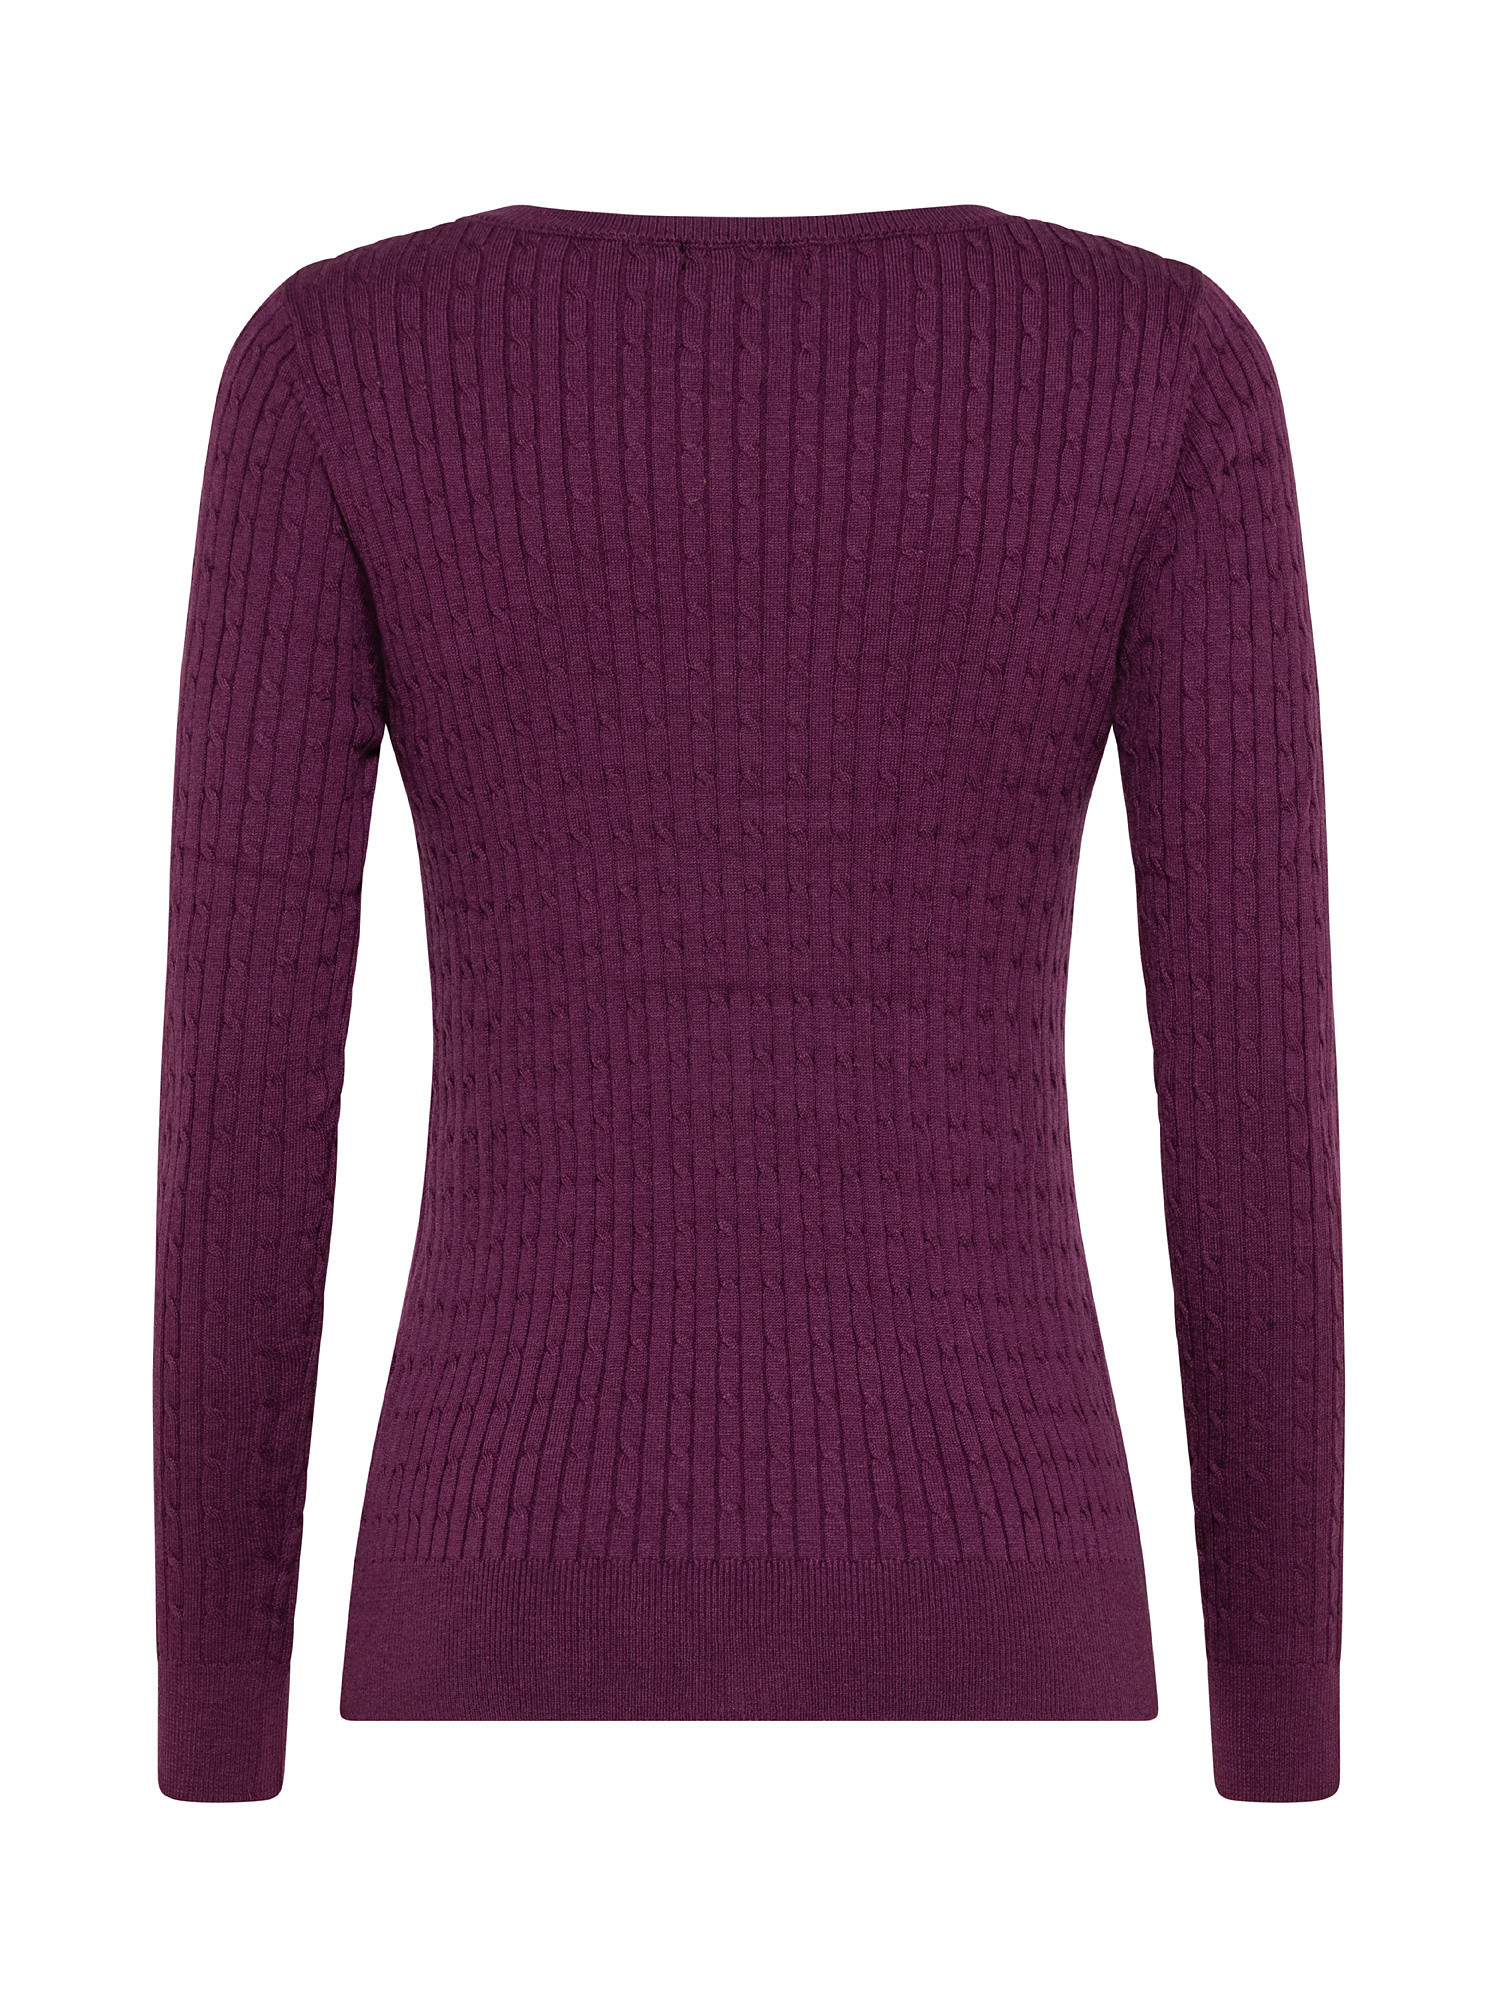 Pullover girocollo in maglia, Viola, large image number 1